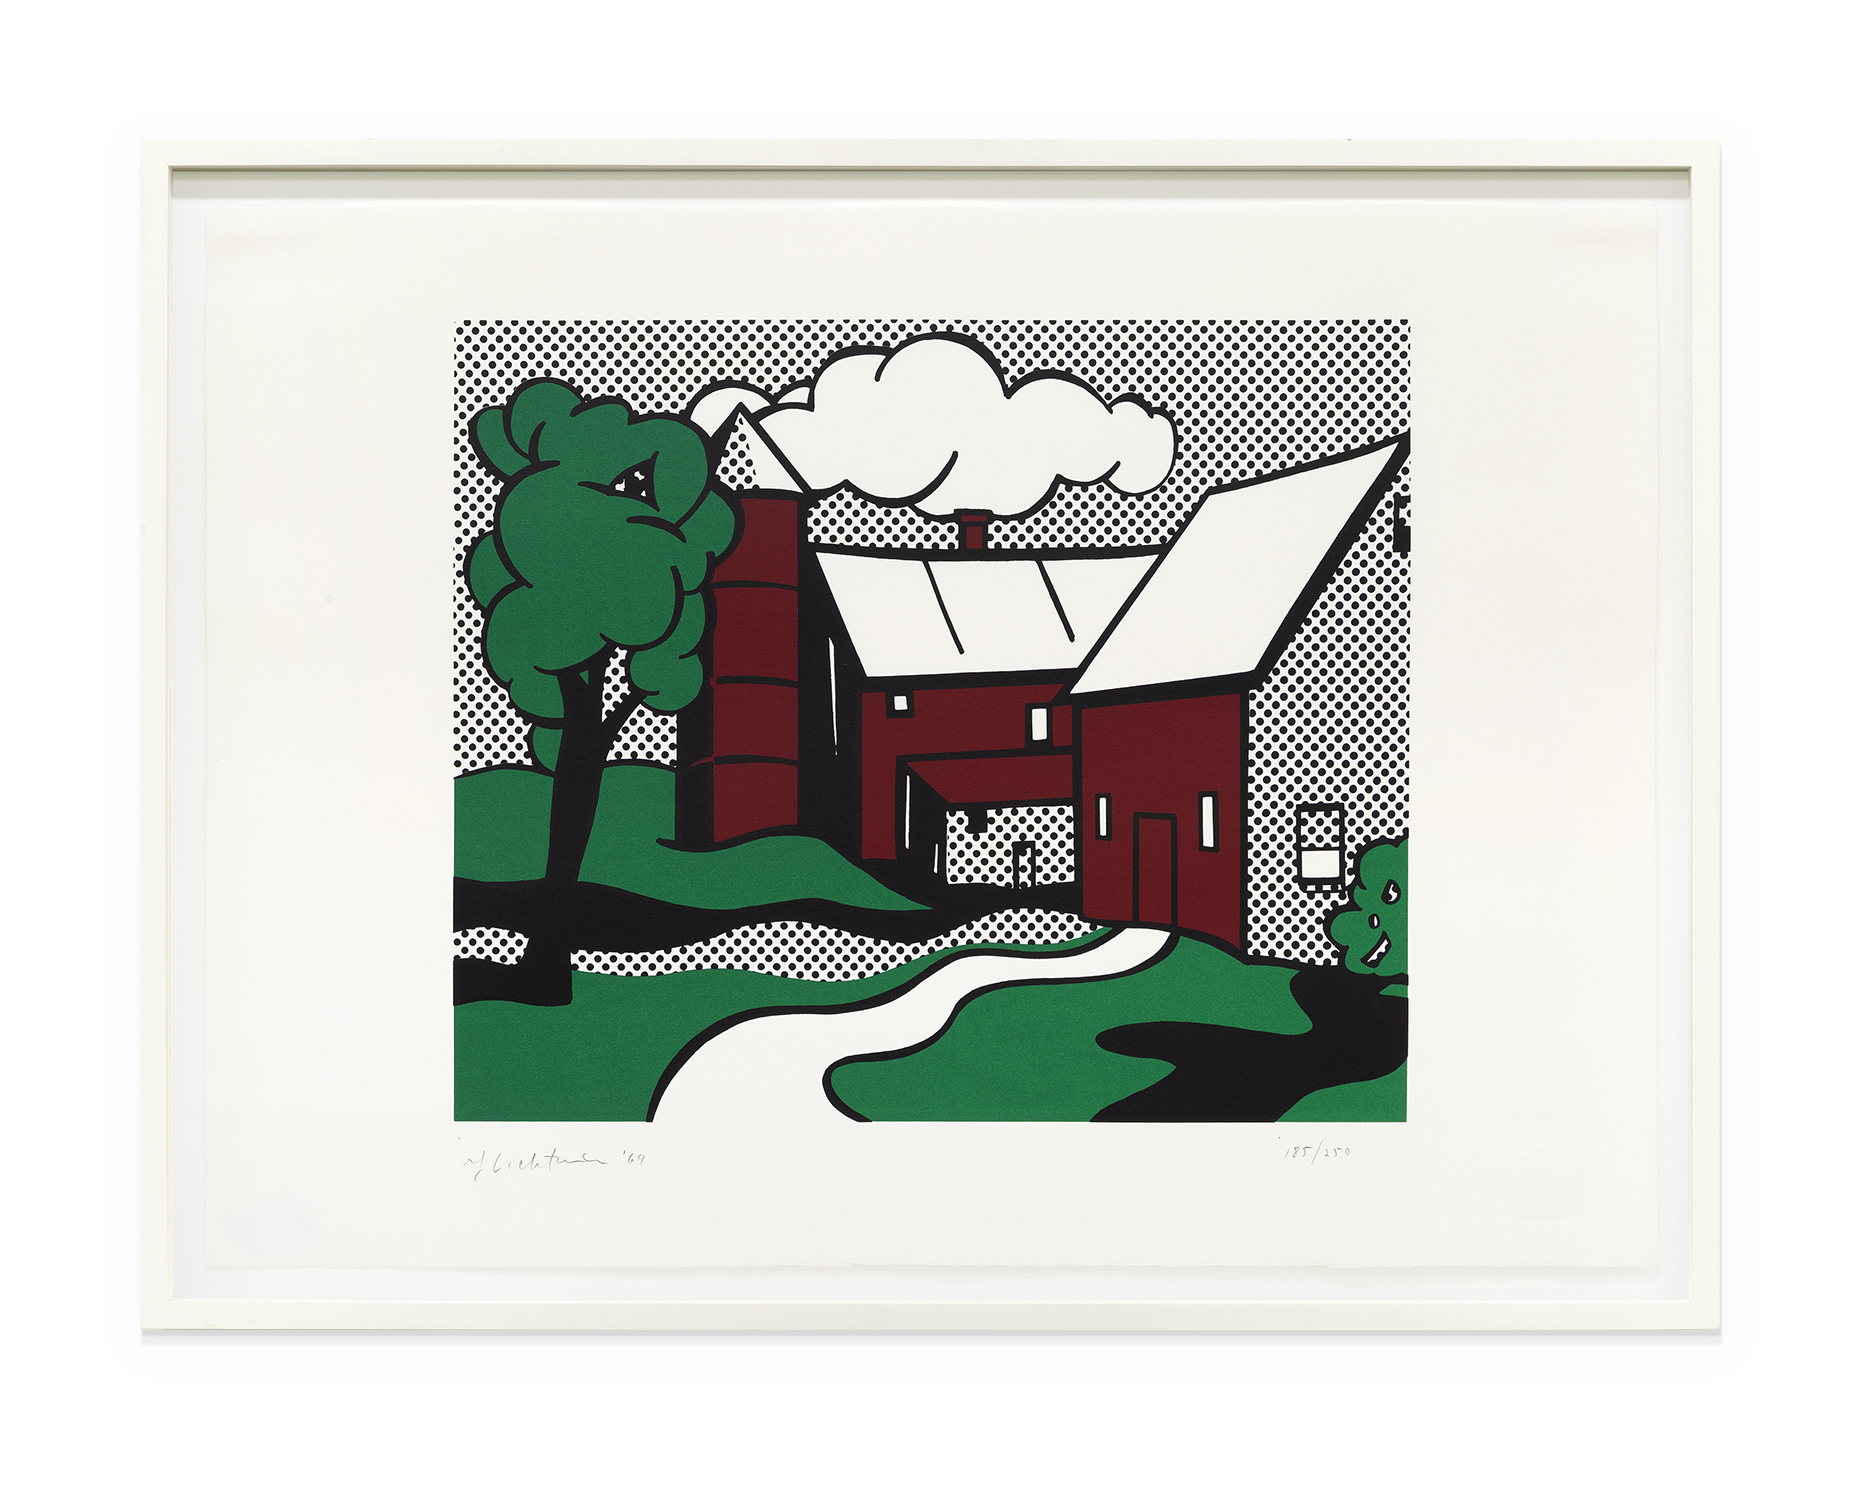 Red Barn, 1969, Screenprint 19 x 26 inches (48.3 x 66 cm) Edition of 250